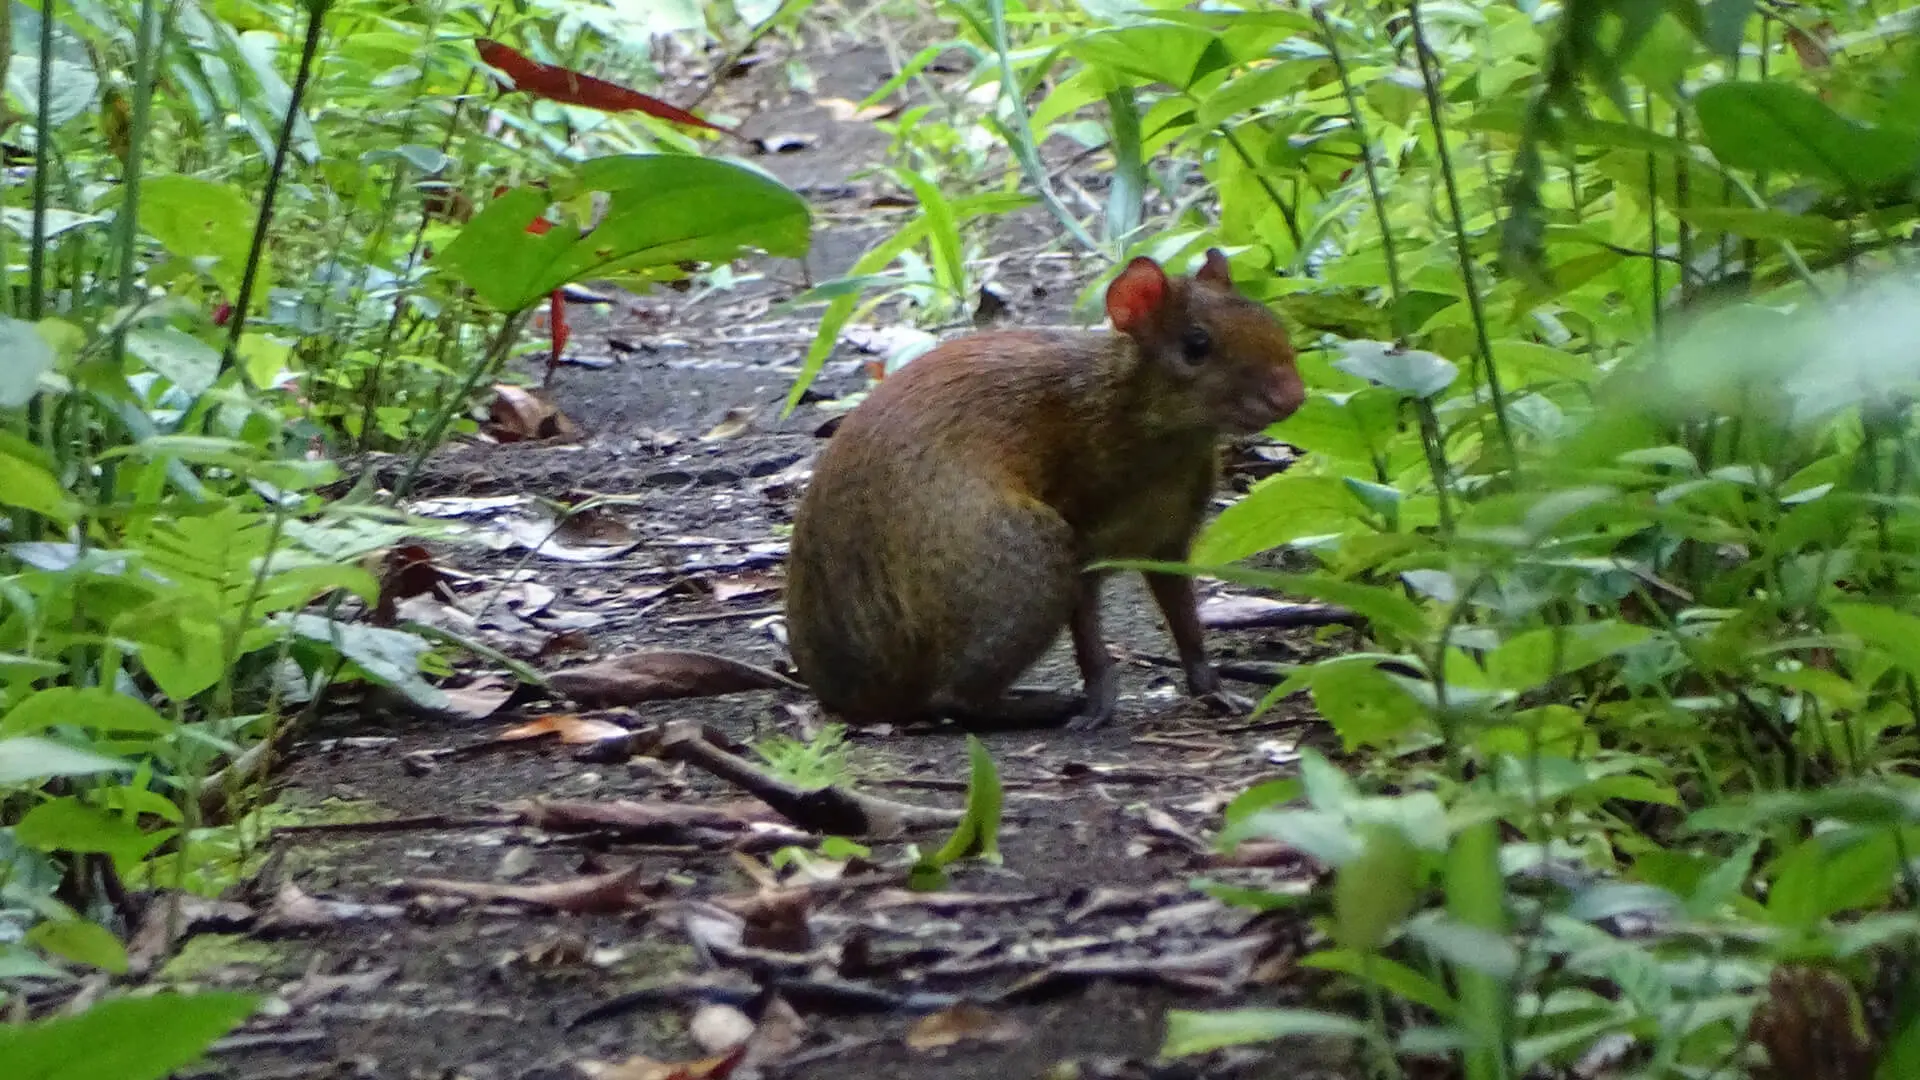 The Aguti is a mid-size rodent commonly seen at Bello Horizonte's gardens in Tambopata | Responsible Travel Peru